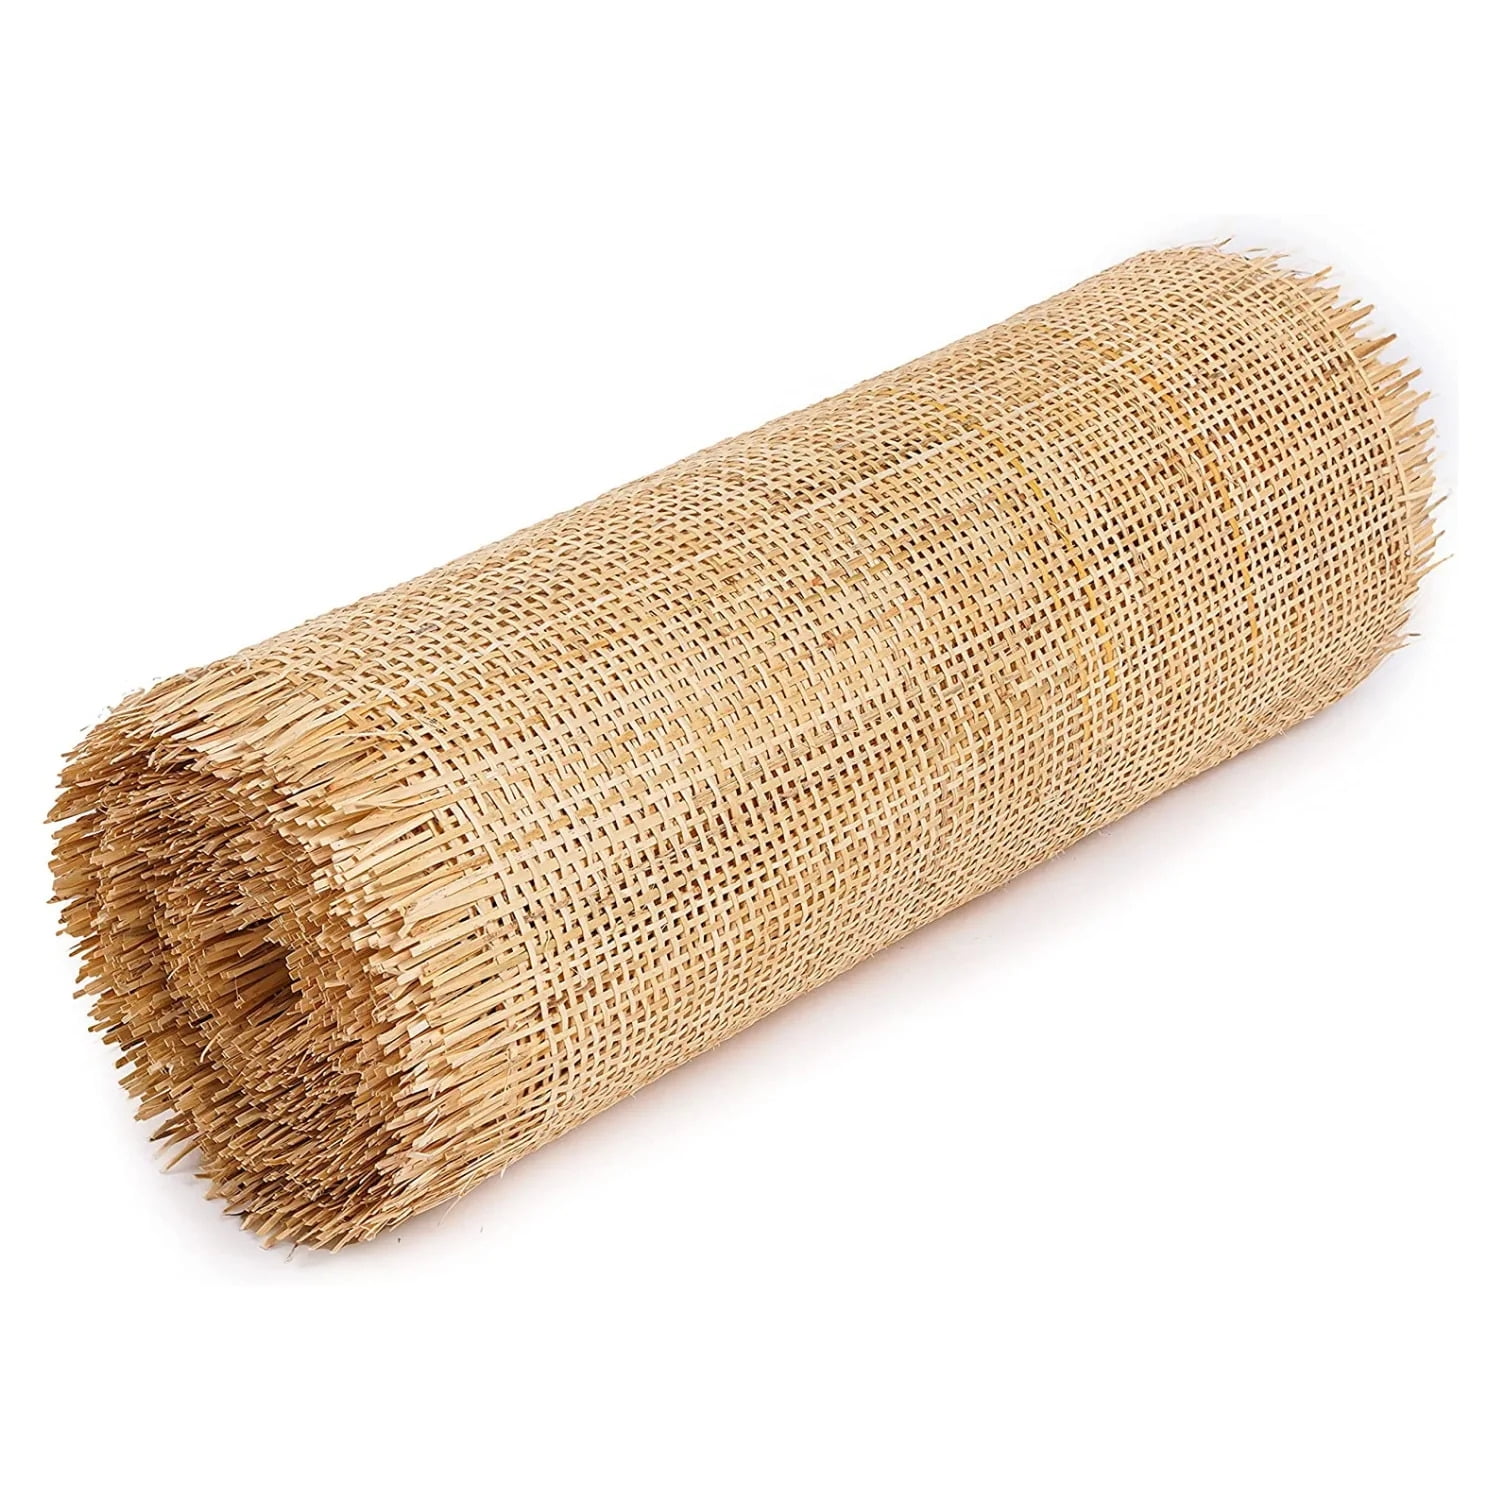 Hi Key Trading Rattan Cane Webbing Roll 18 in Width x 36 in Length, Open Weave Wicker Webbing for DIY Home Projects and Furniture, Natural Rattan Fabric Caning